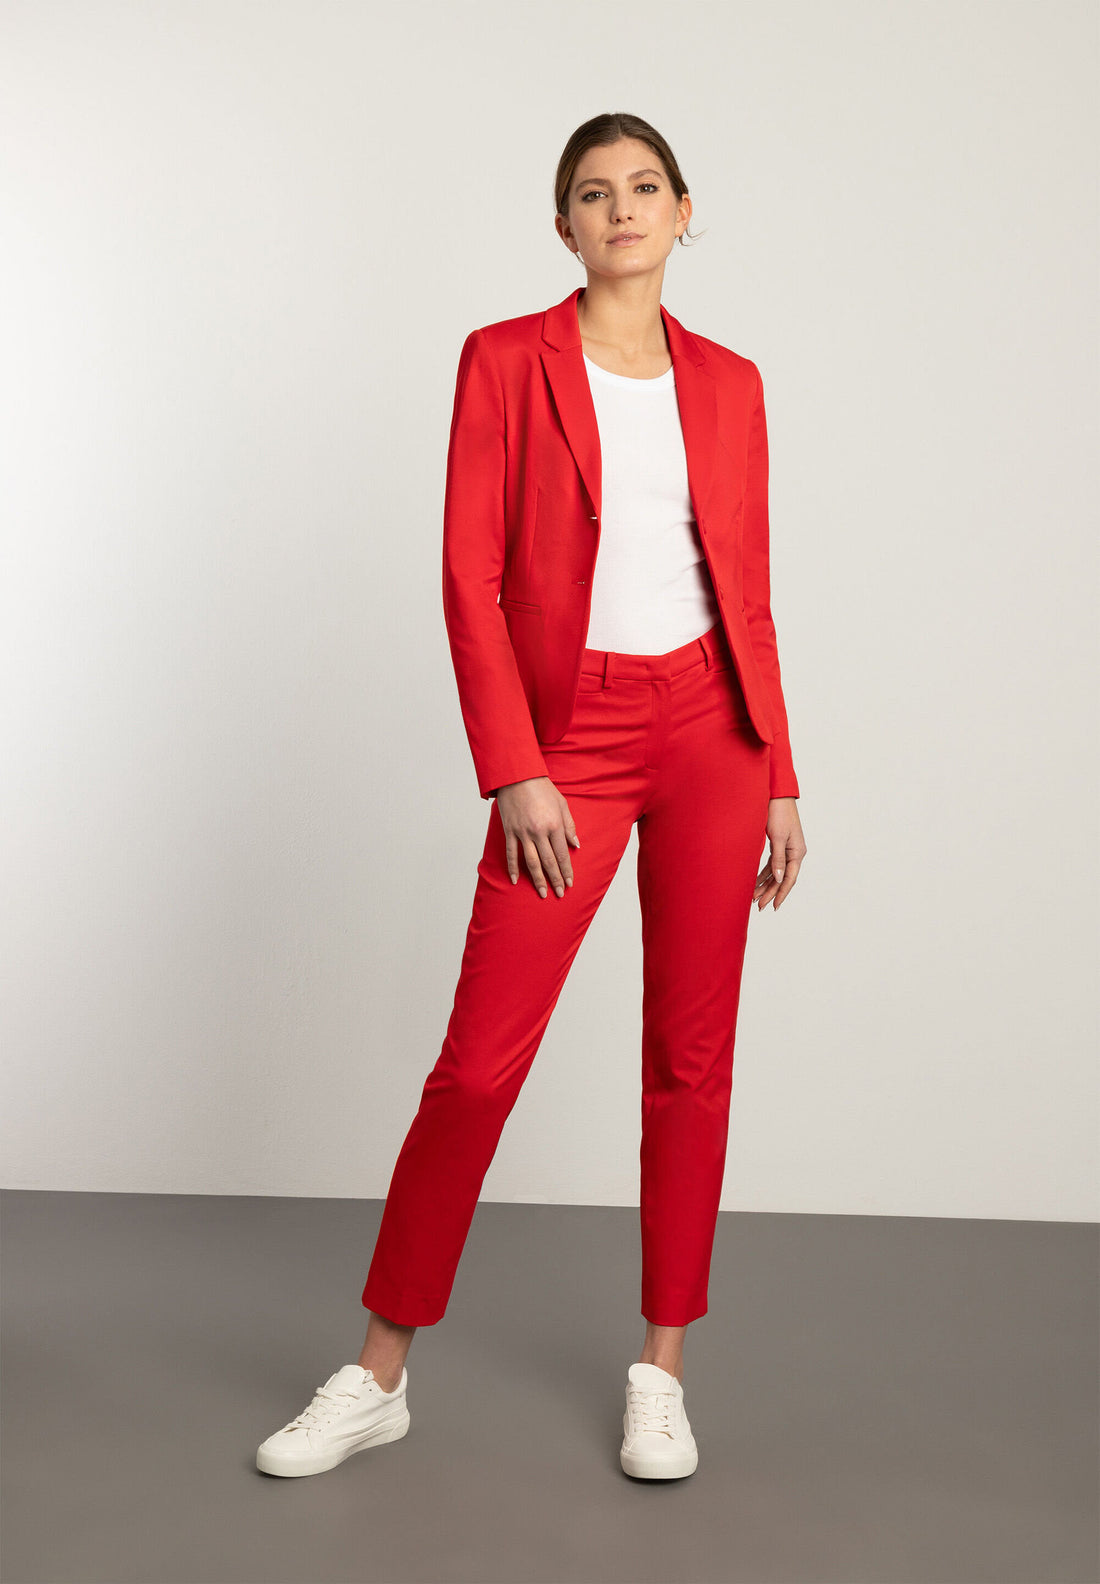 Red Blazer With A Fine Structure_41826576_0537_02